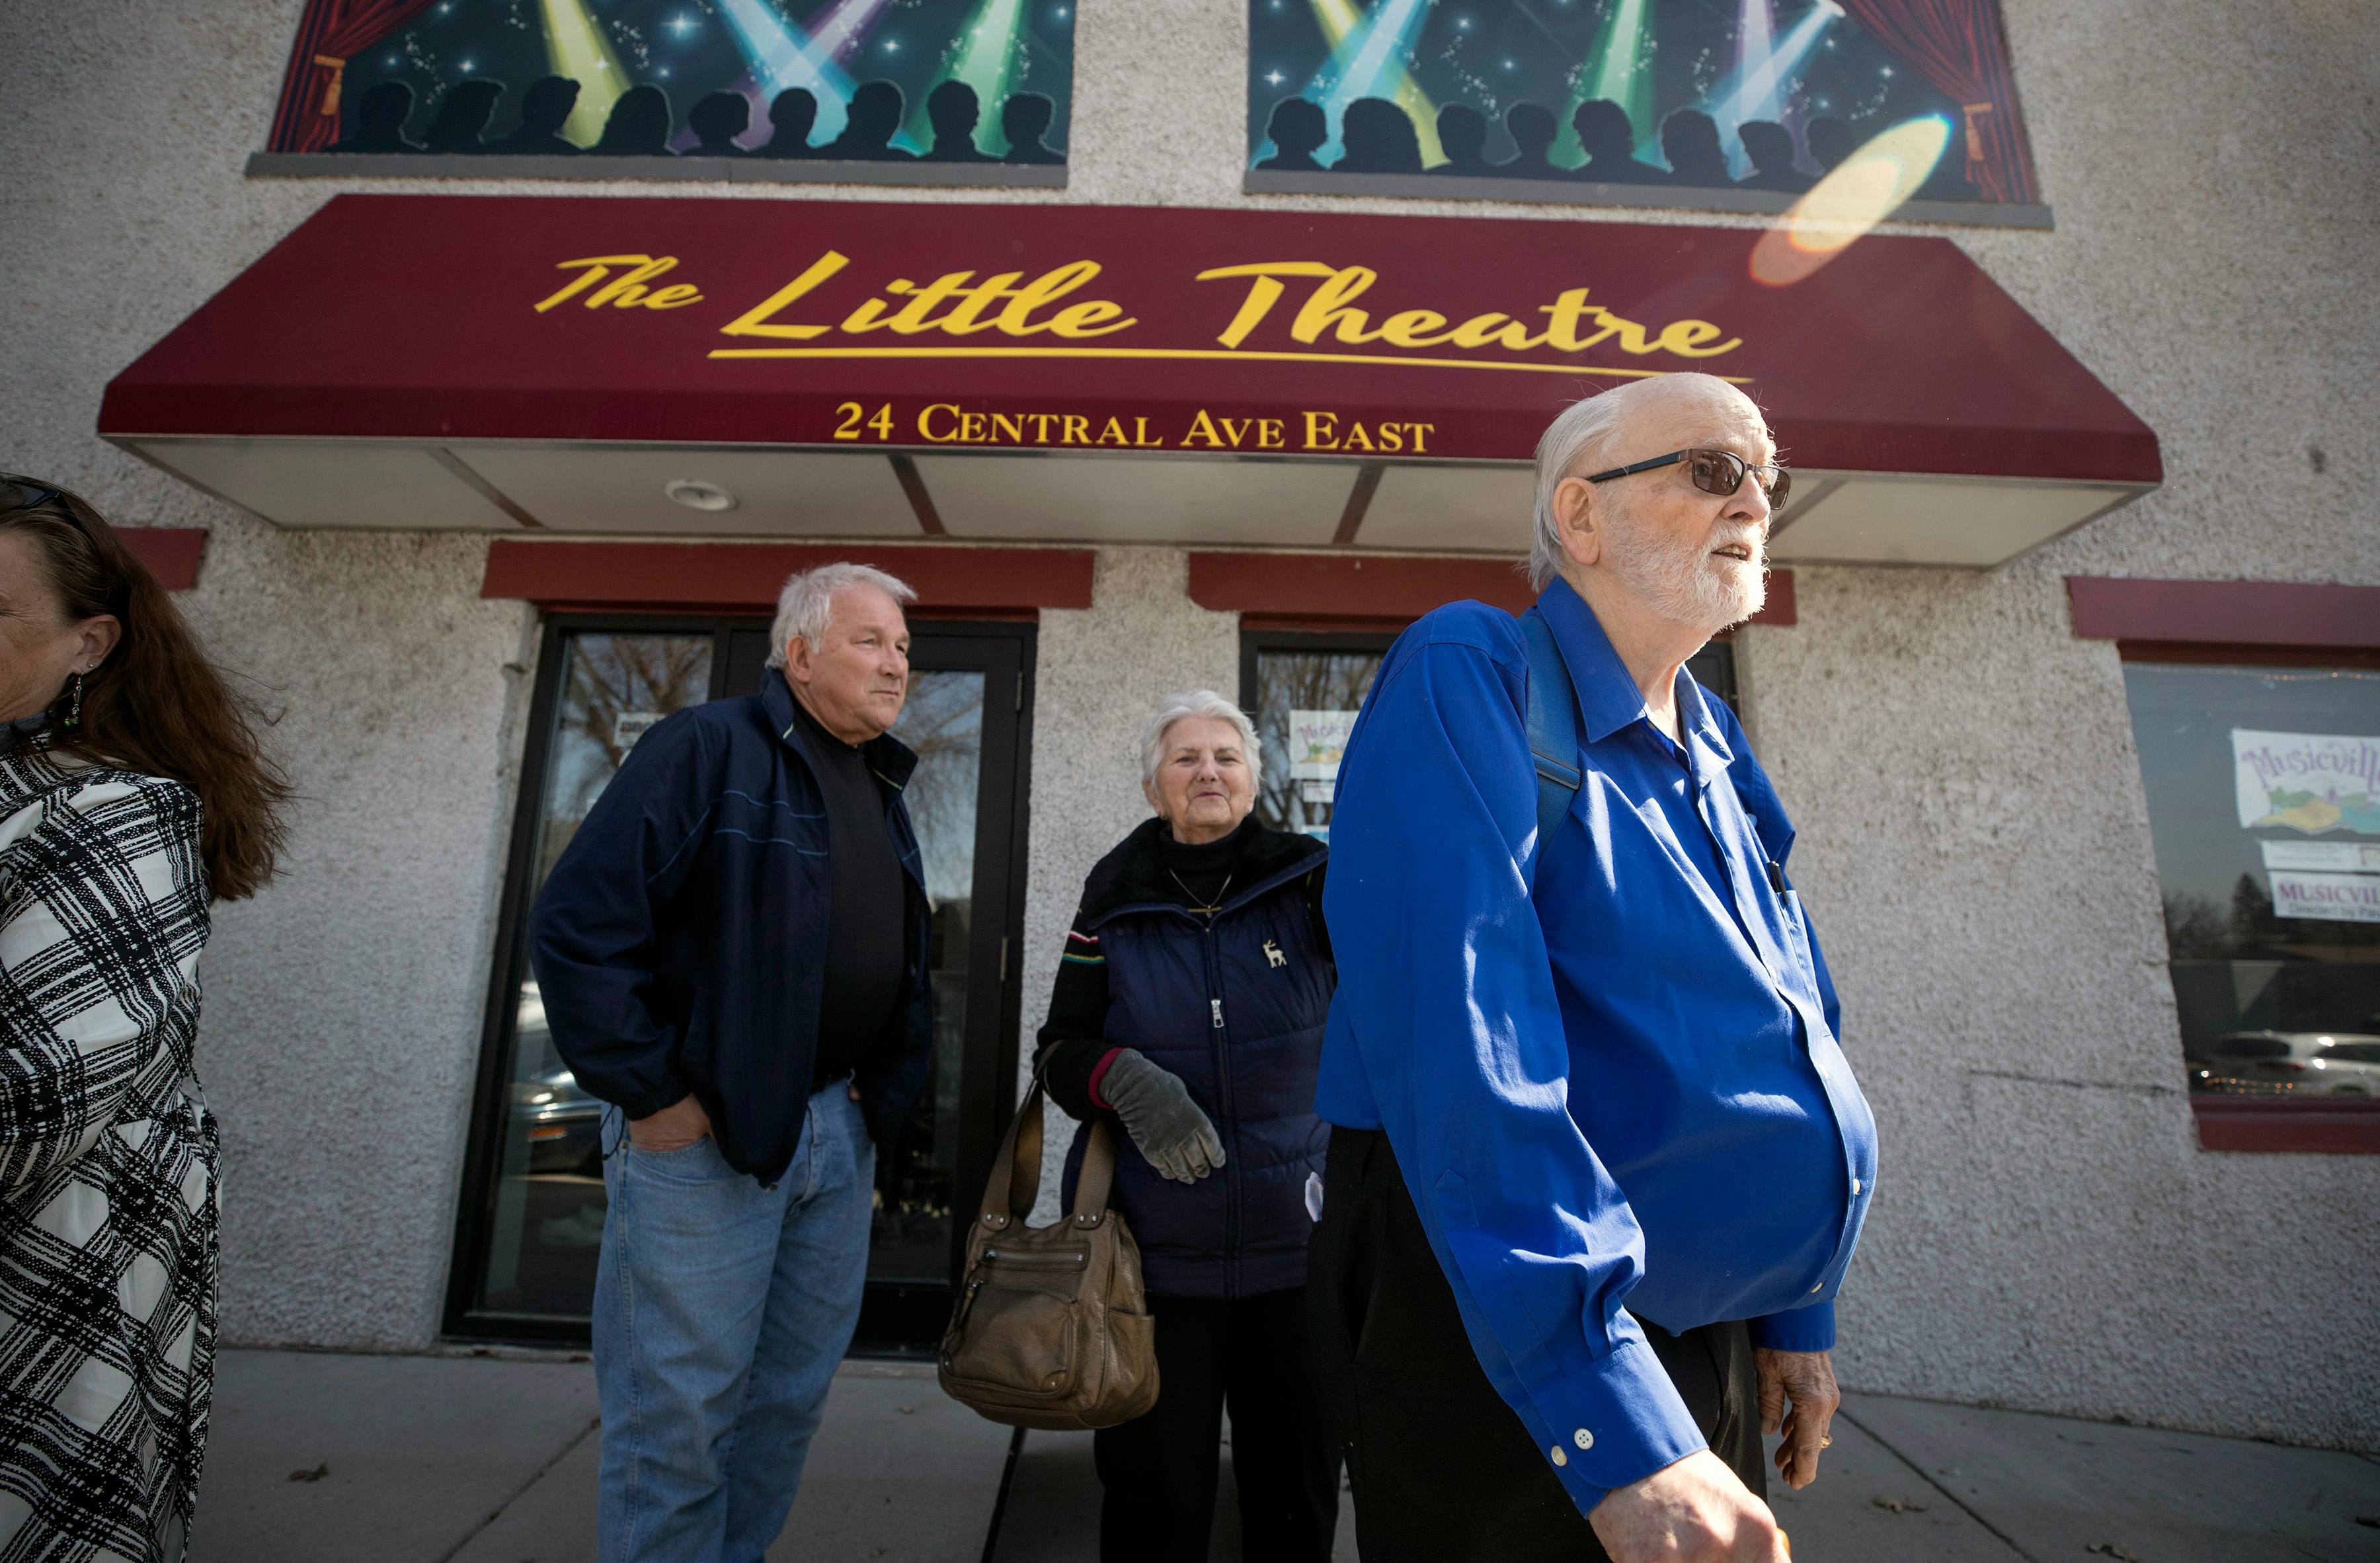 Bob Cushman was among New London, Minn., residents outside the Little Theatre, which hosts the popular 'story shows' series that helps connect the community.